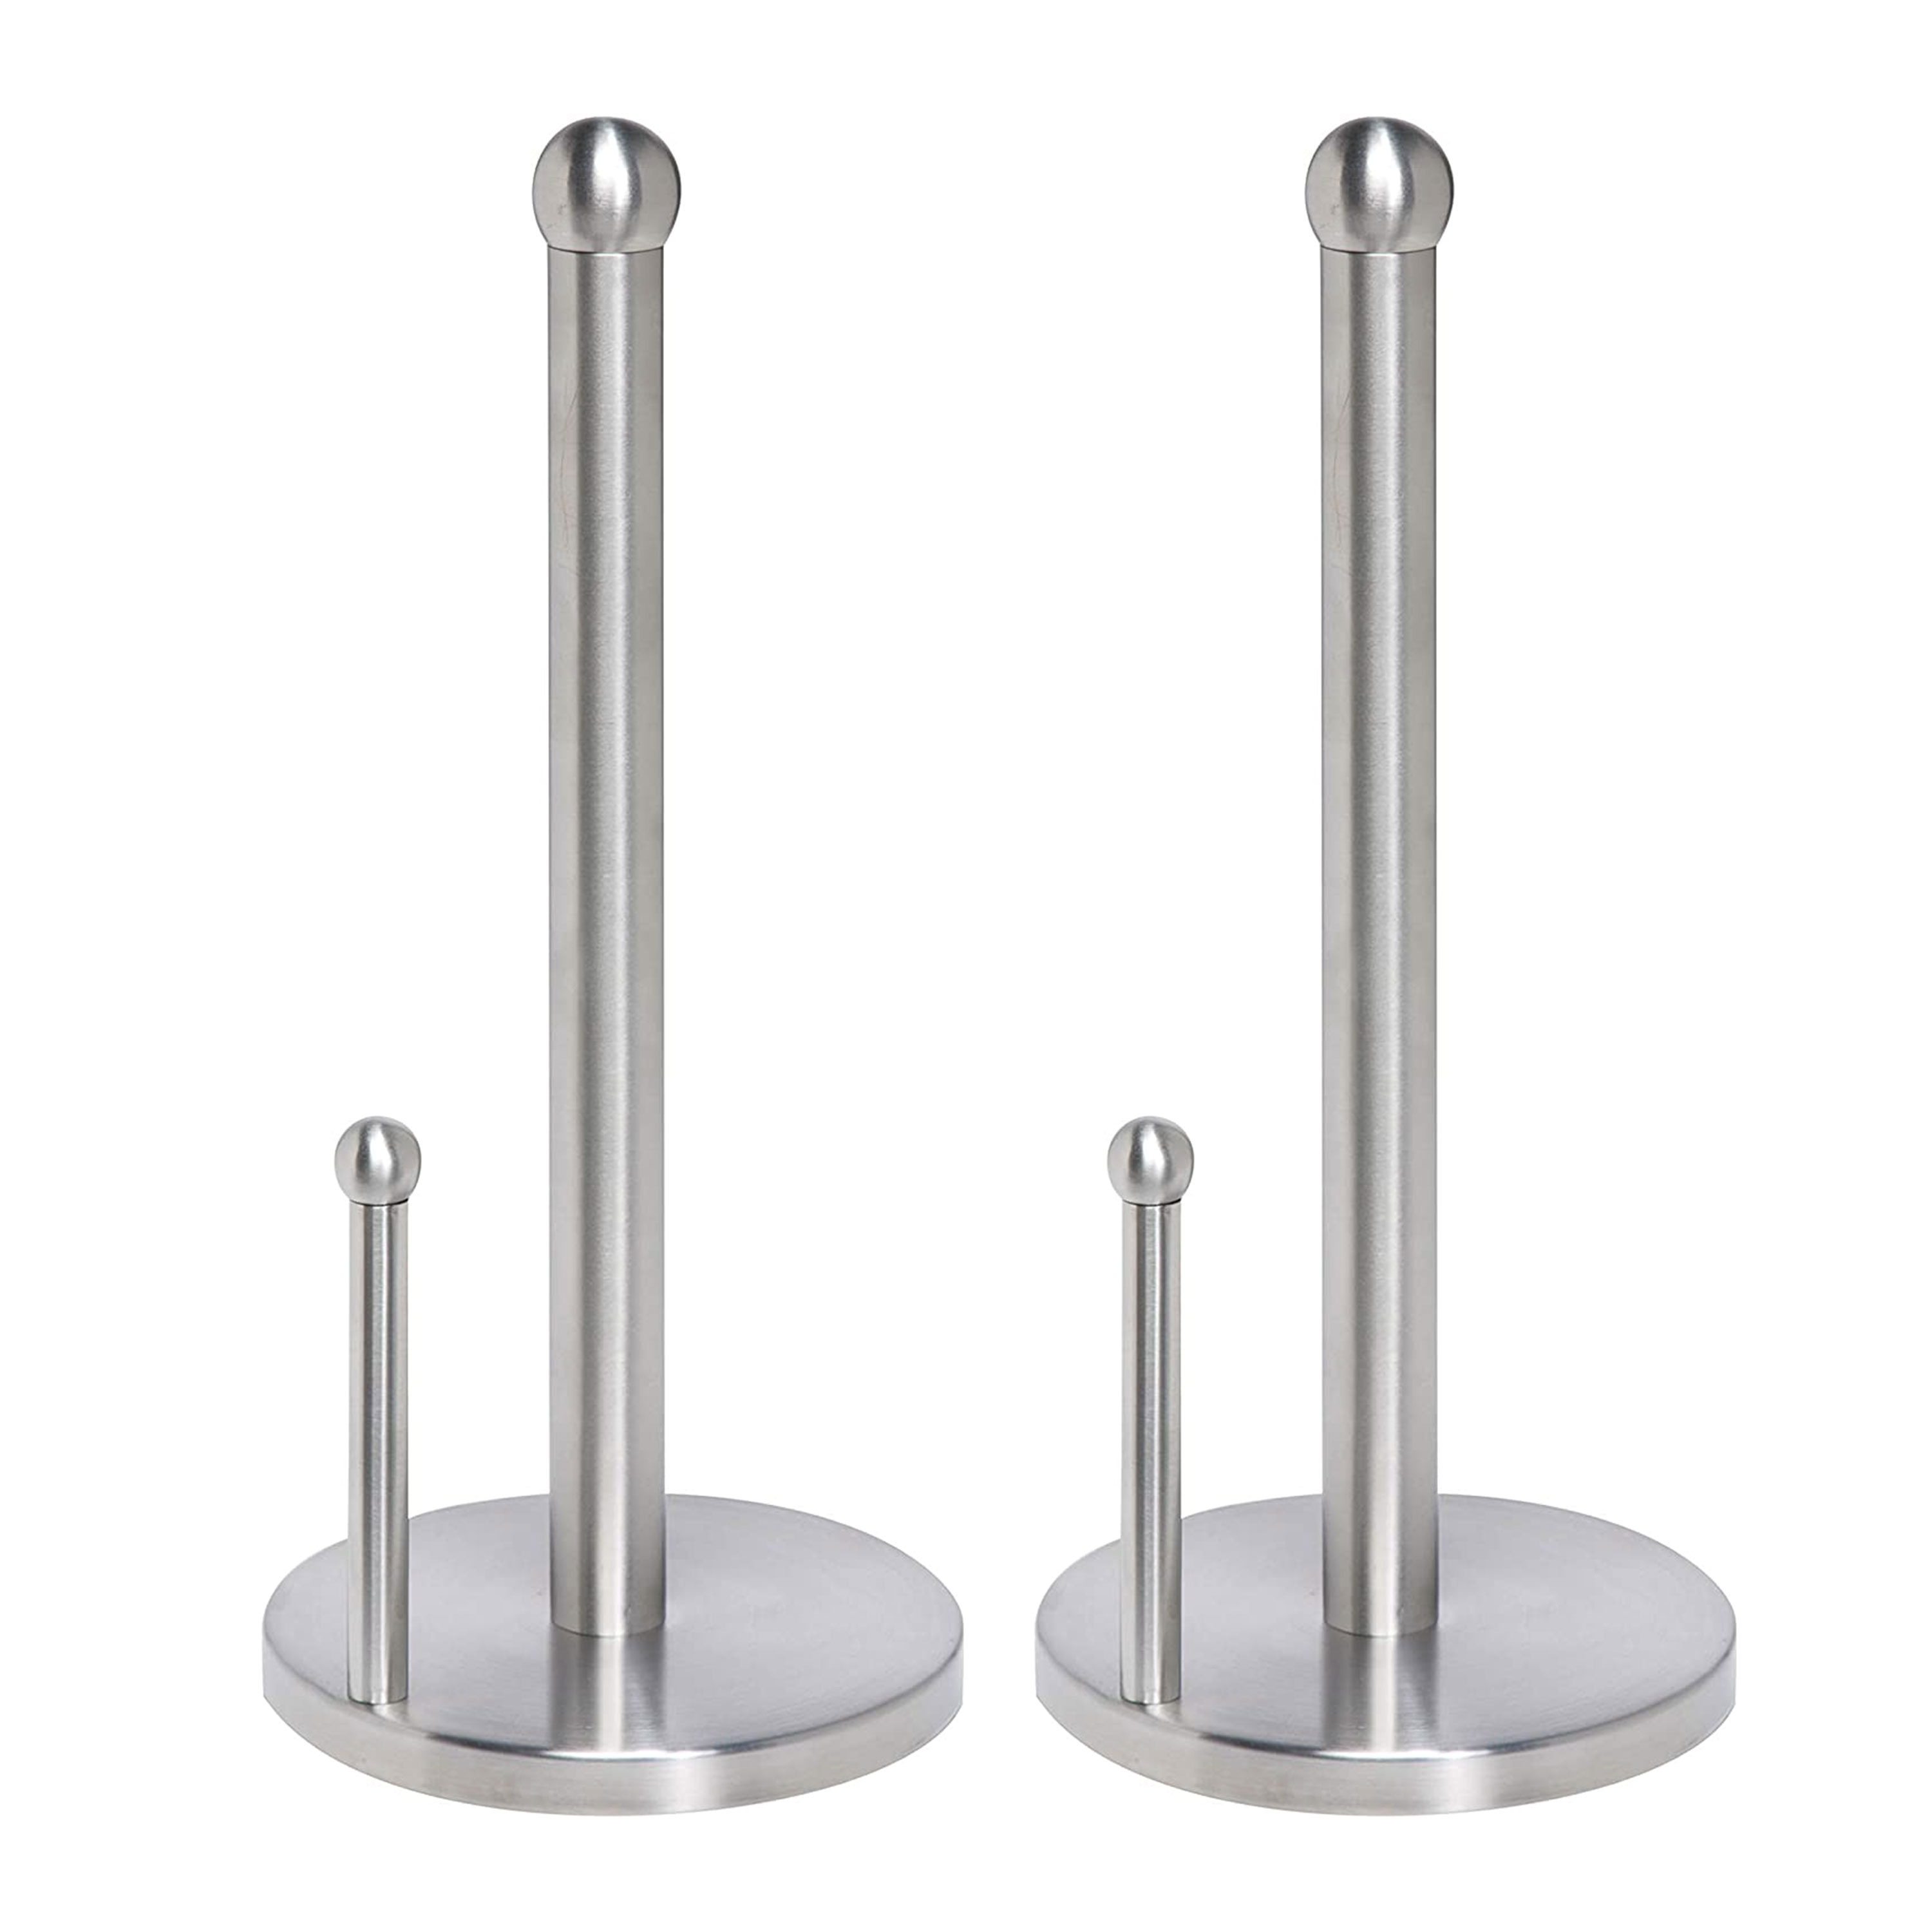 https://ak1.ostkcdn.com/images/products/is/images/direct/970dfa498537dcff3b47fe3d8c22da78895c94e3/Innovaze-Stainless-Steel-Paper-Towel-Holders-Set-of-2.jpg